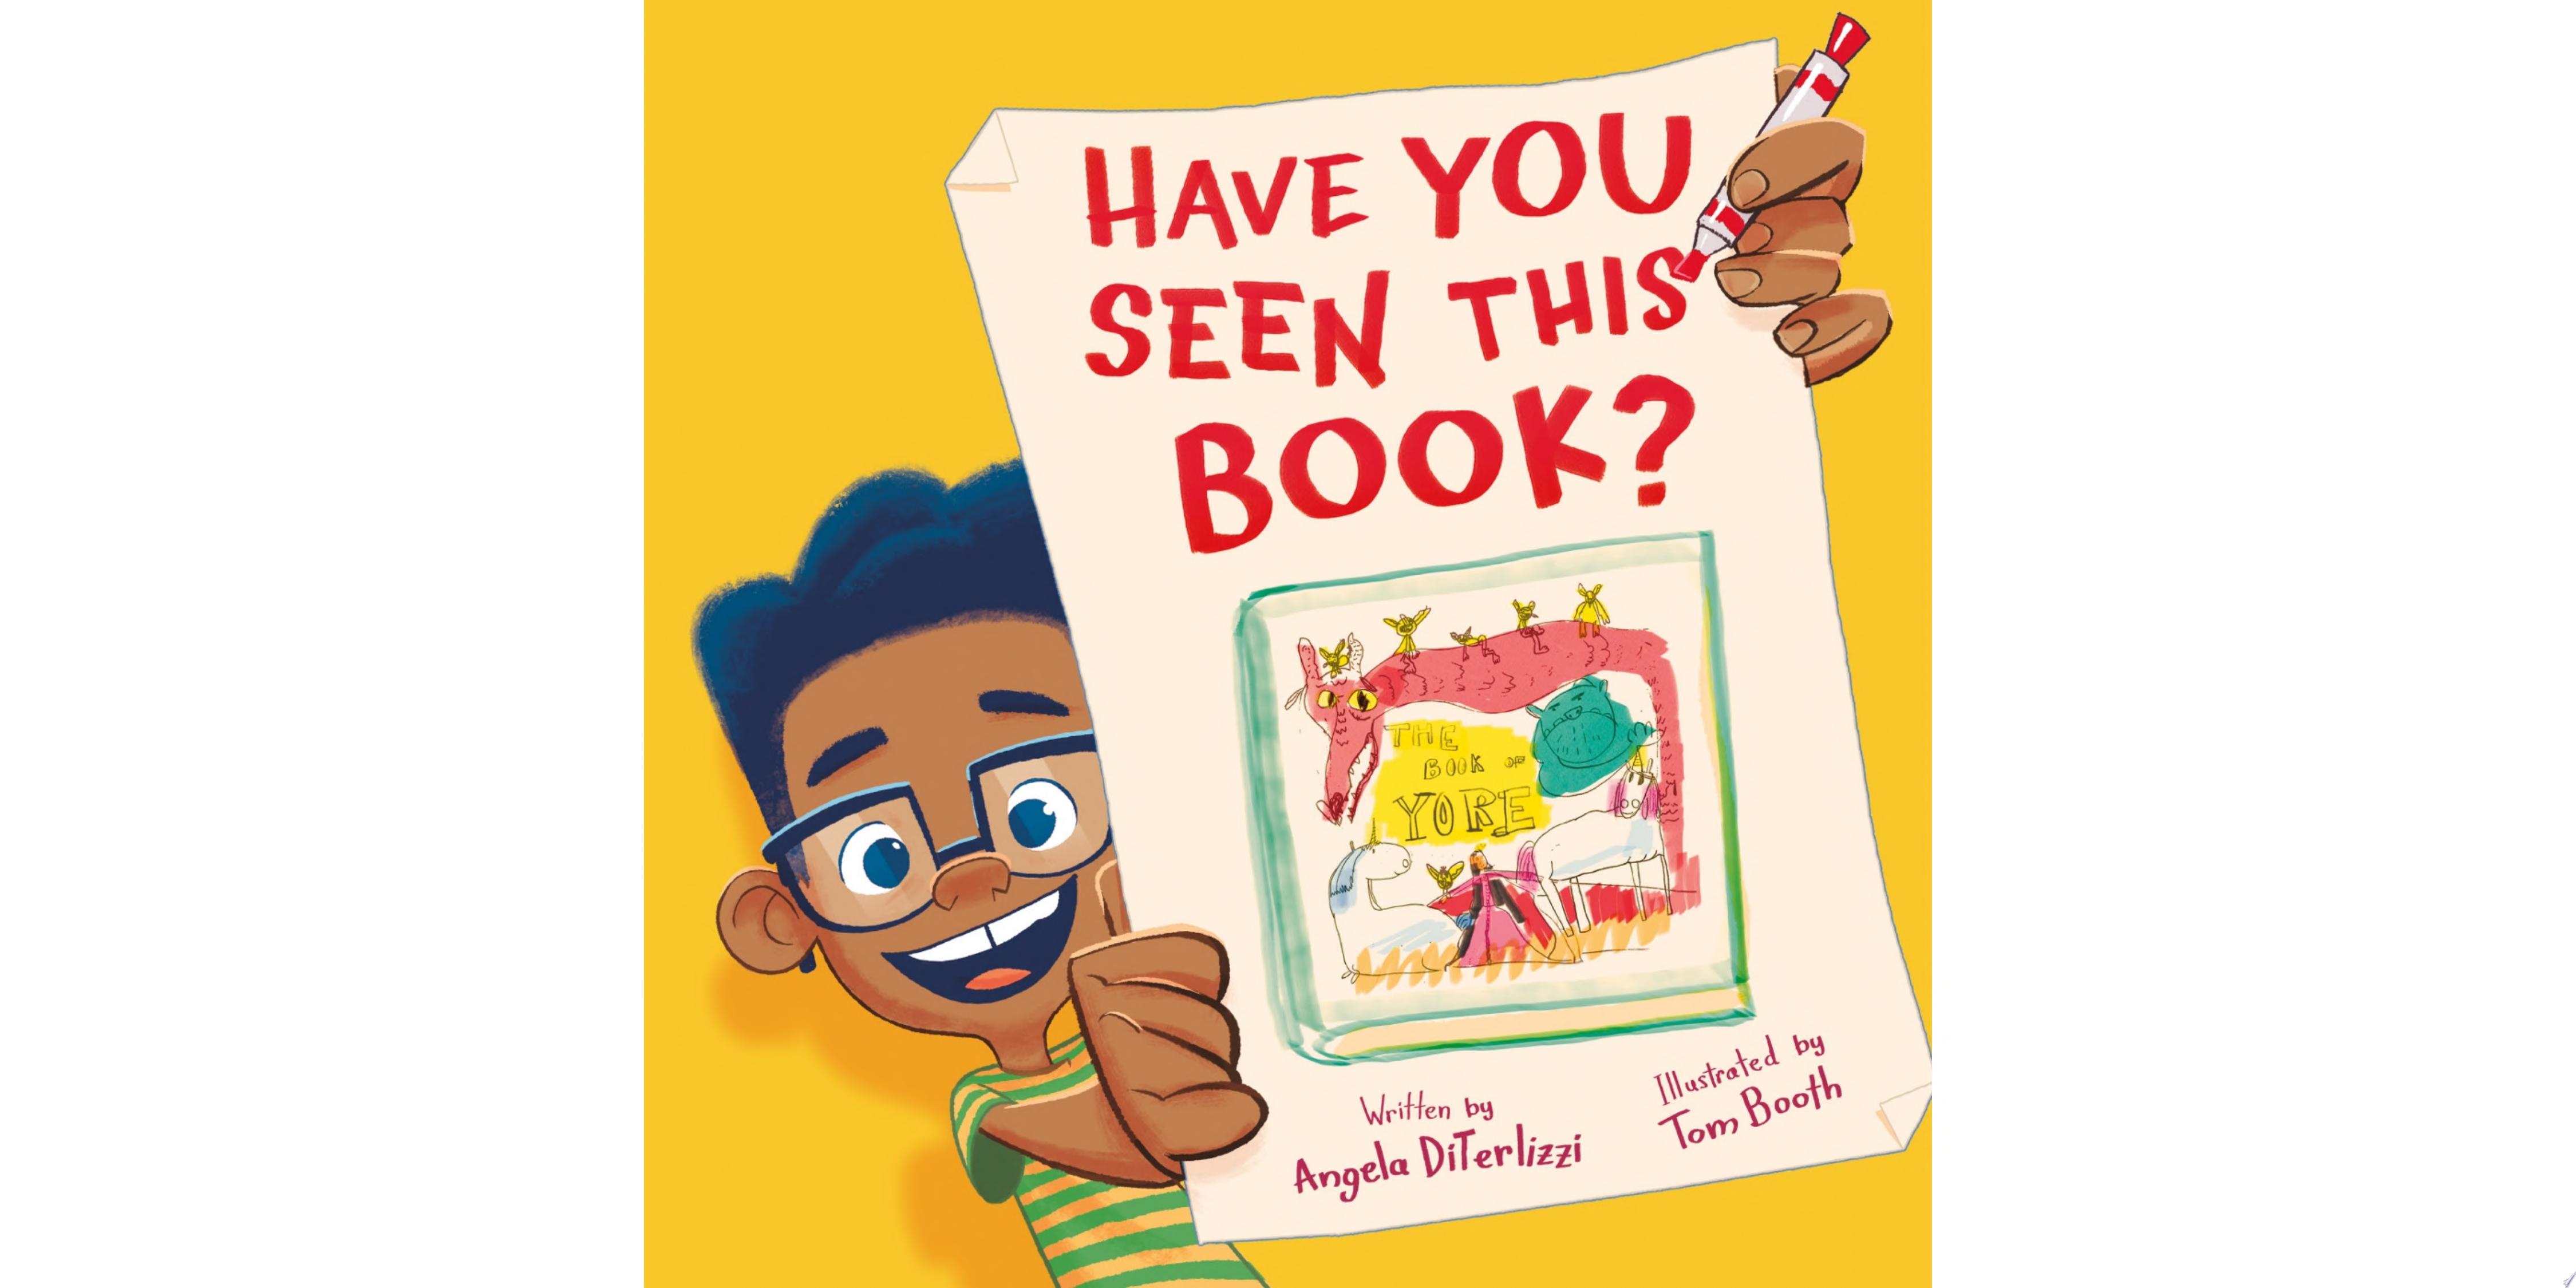 Image for "Have You Seen This Book?"